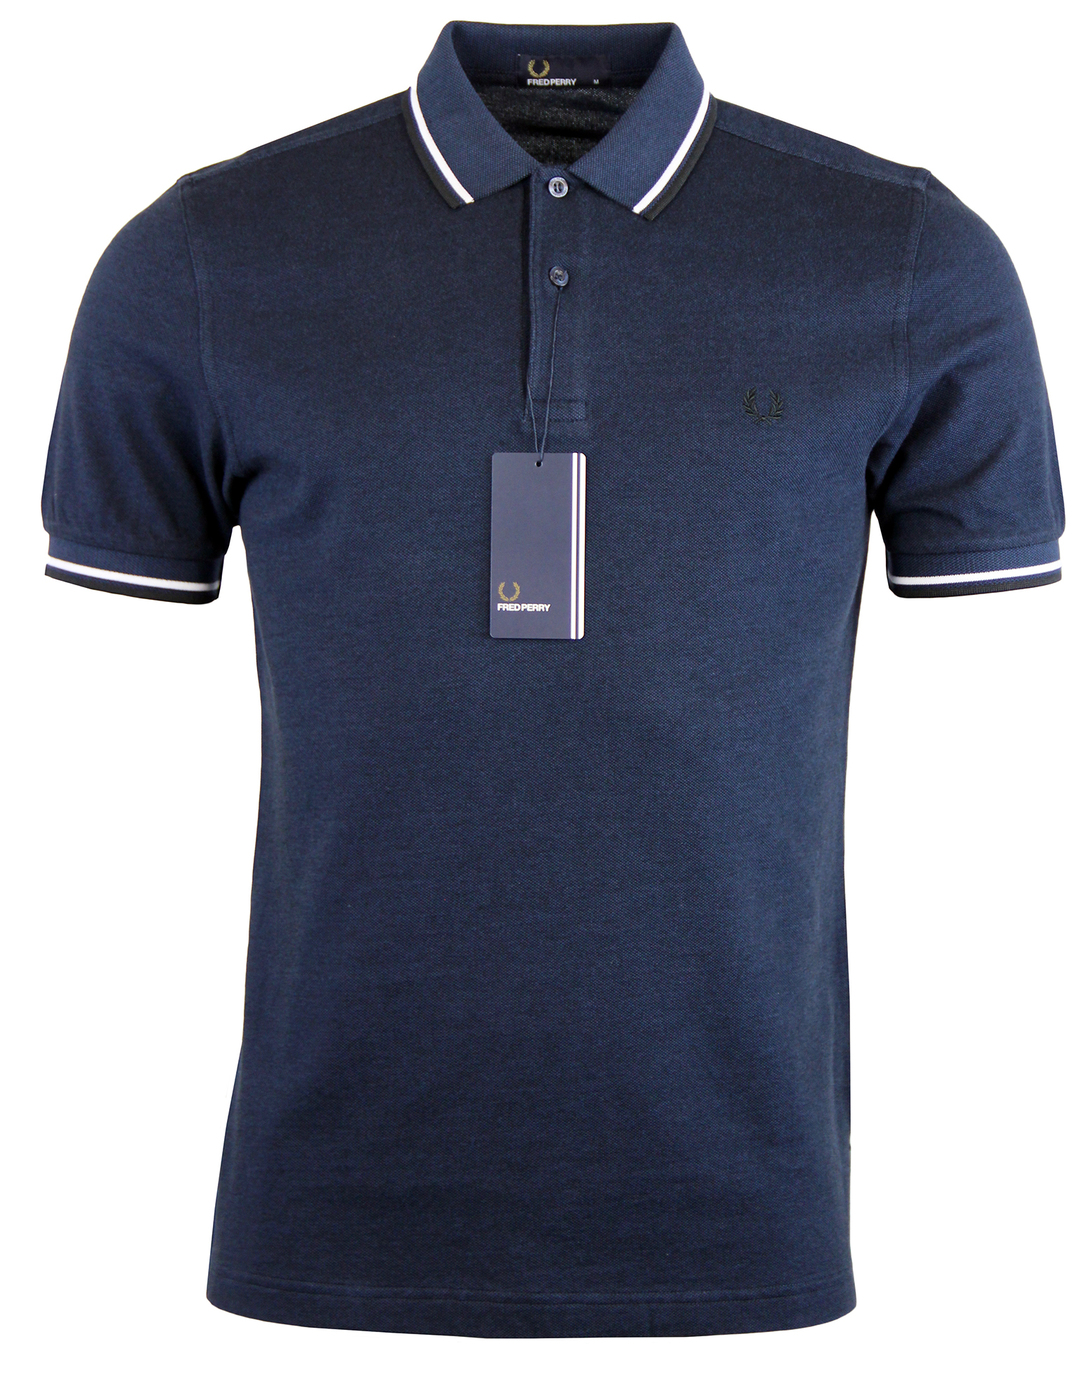 FRED PERRY M3600 Mod Twin Tipped Polo Shirt SB